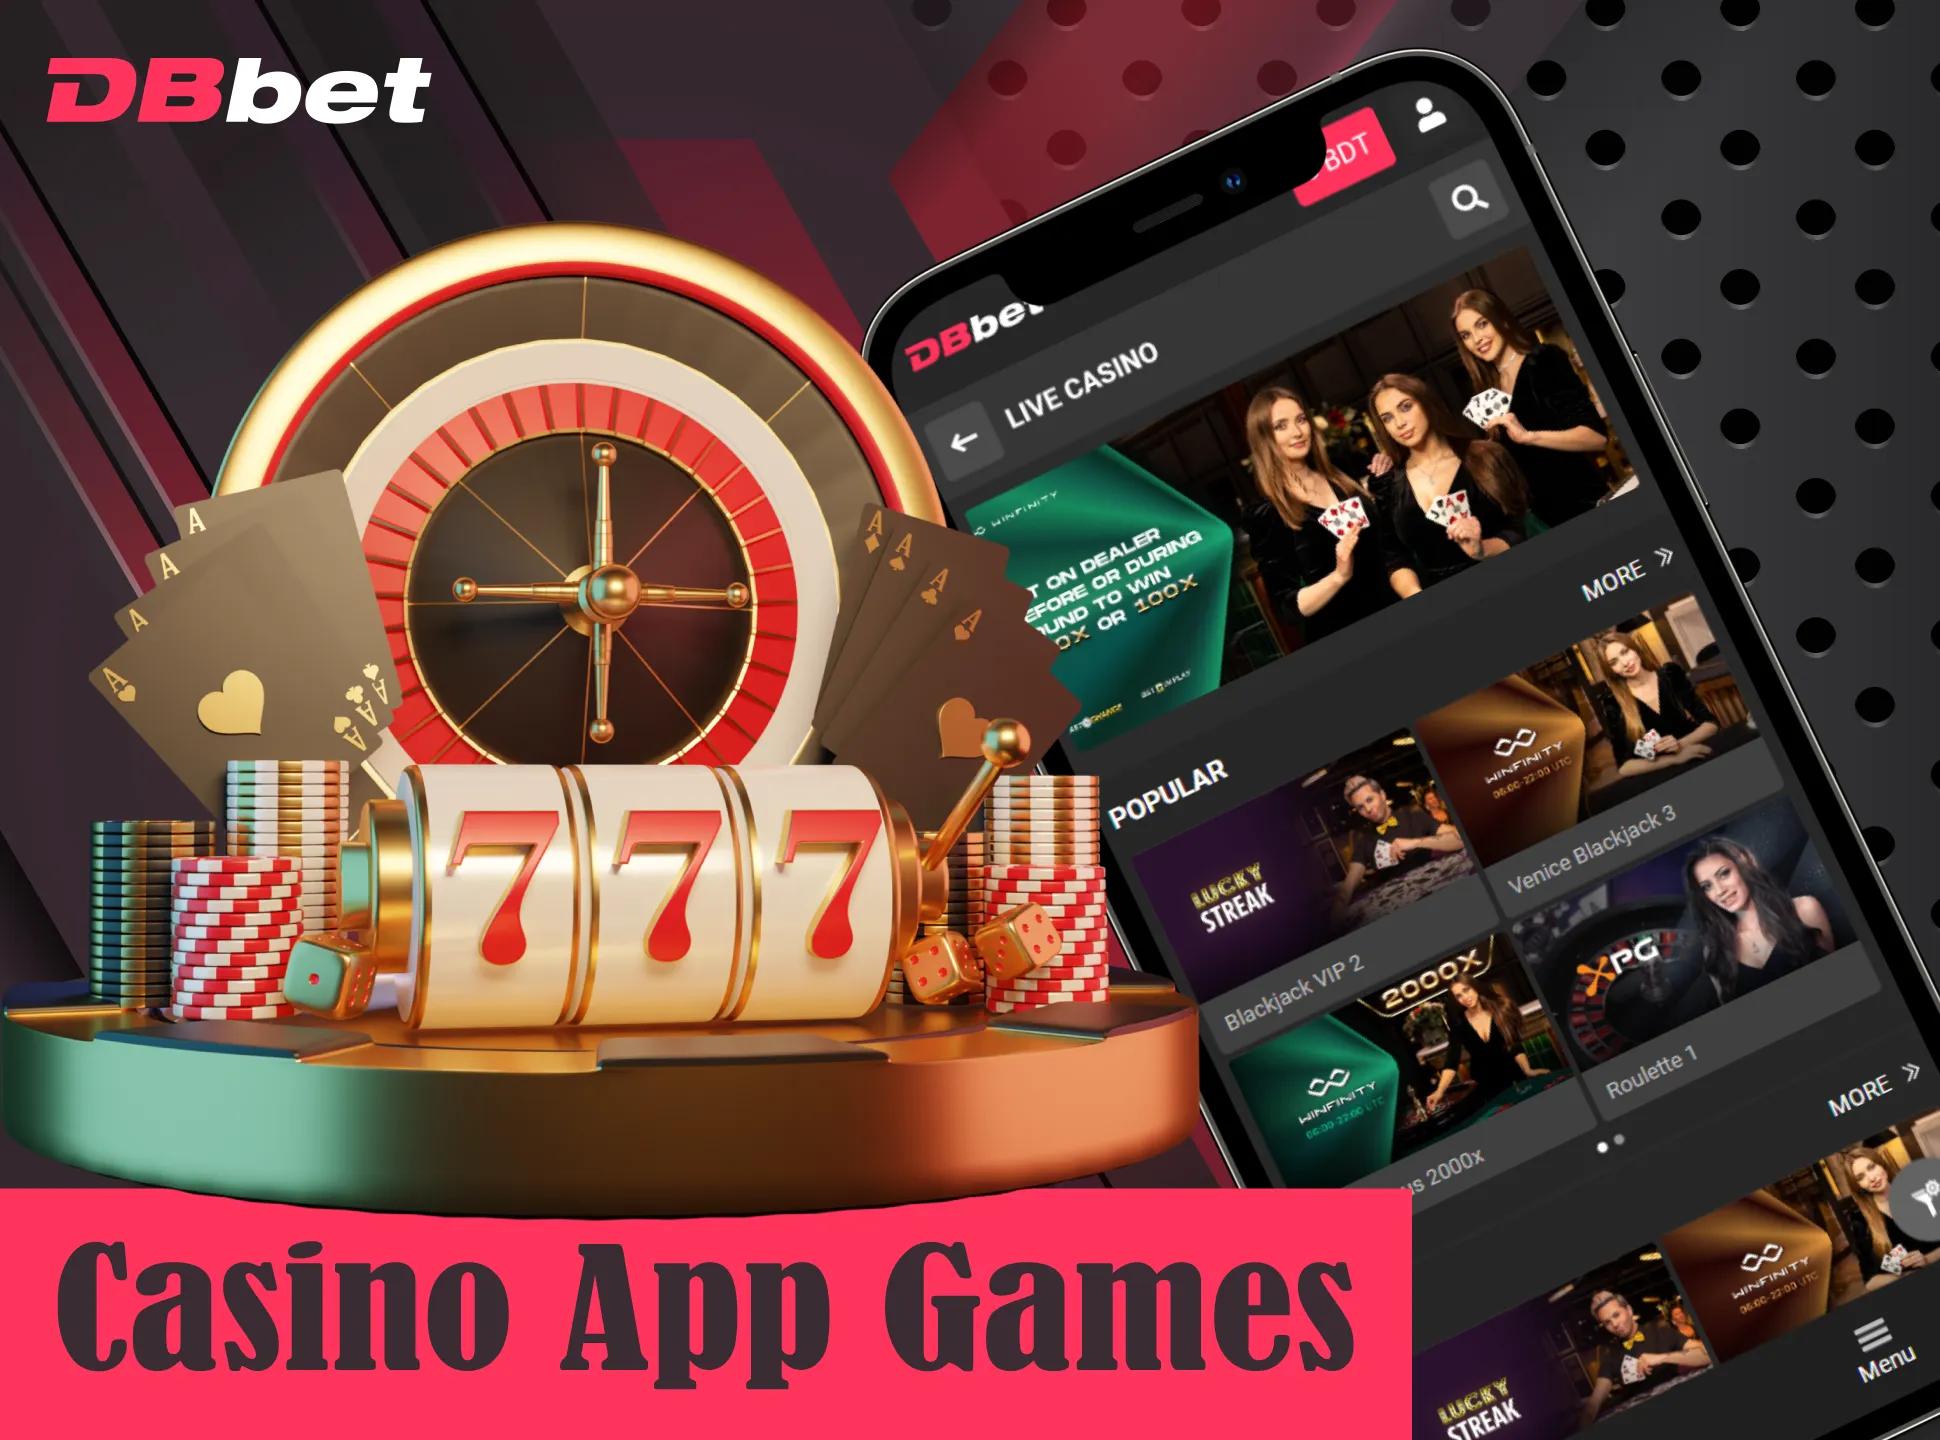 Play different casino games in DBbet app.